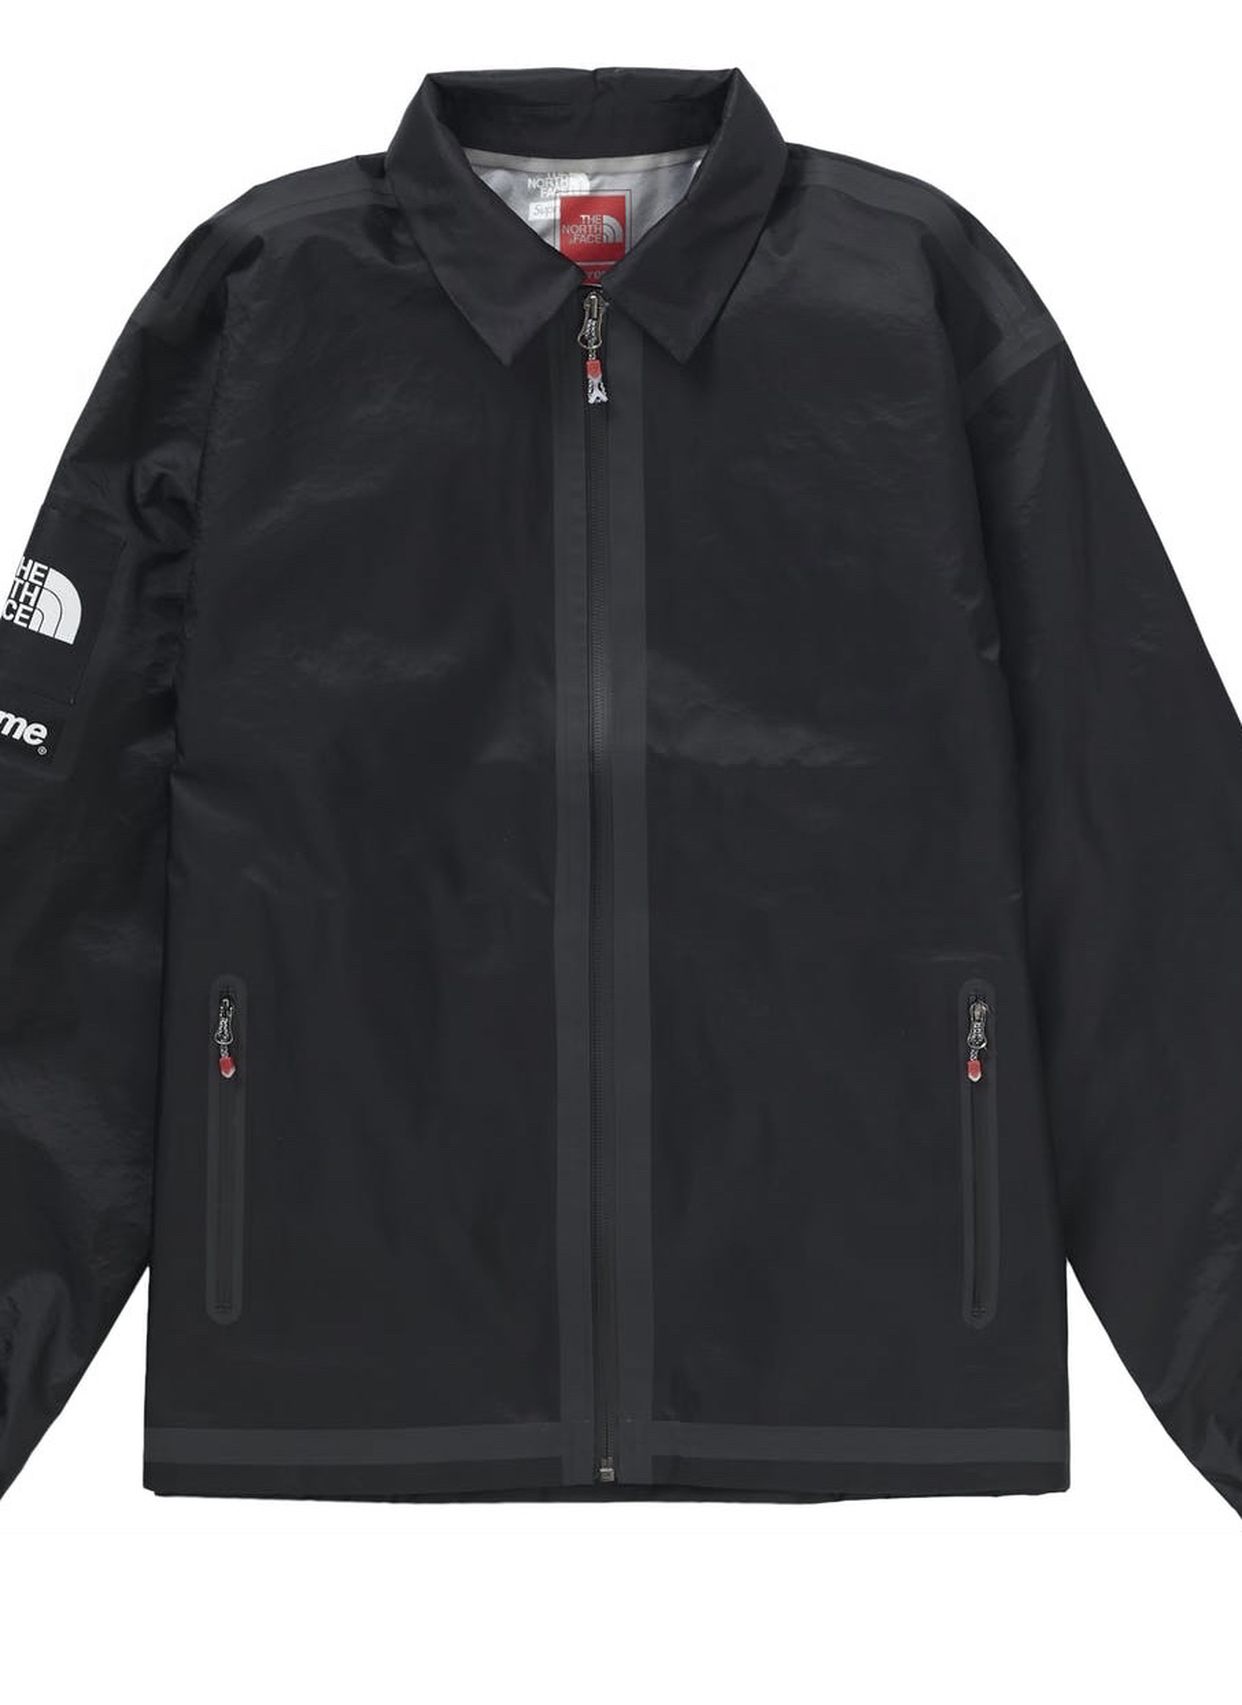 Supreme X The North Face Summit Series Coach Jacket